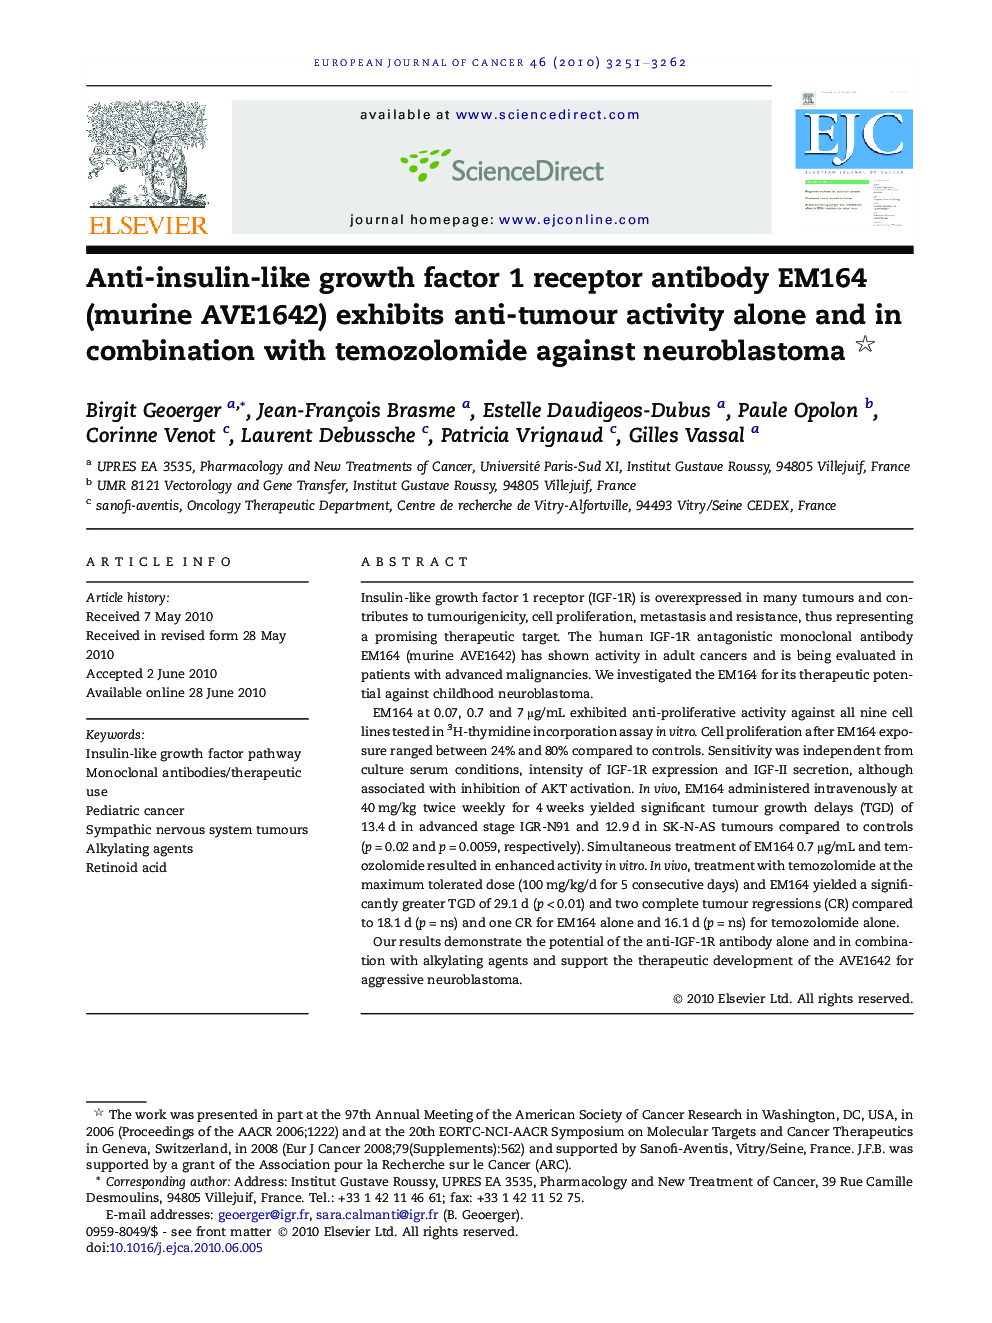 Anti-insulin-like growth factor 1 receptor antibody EM164 (murine AVE1642) exhibits anti-tumour activity alone and in combination with temozolomide against neuroblastoma 